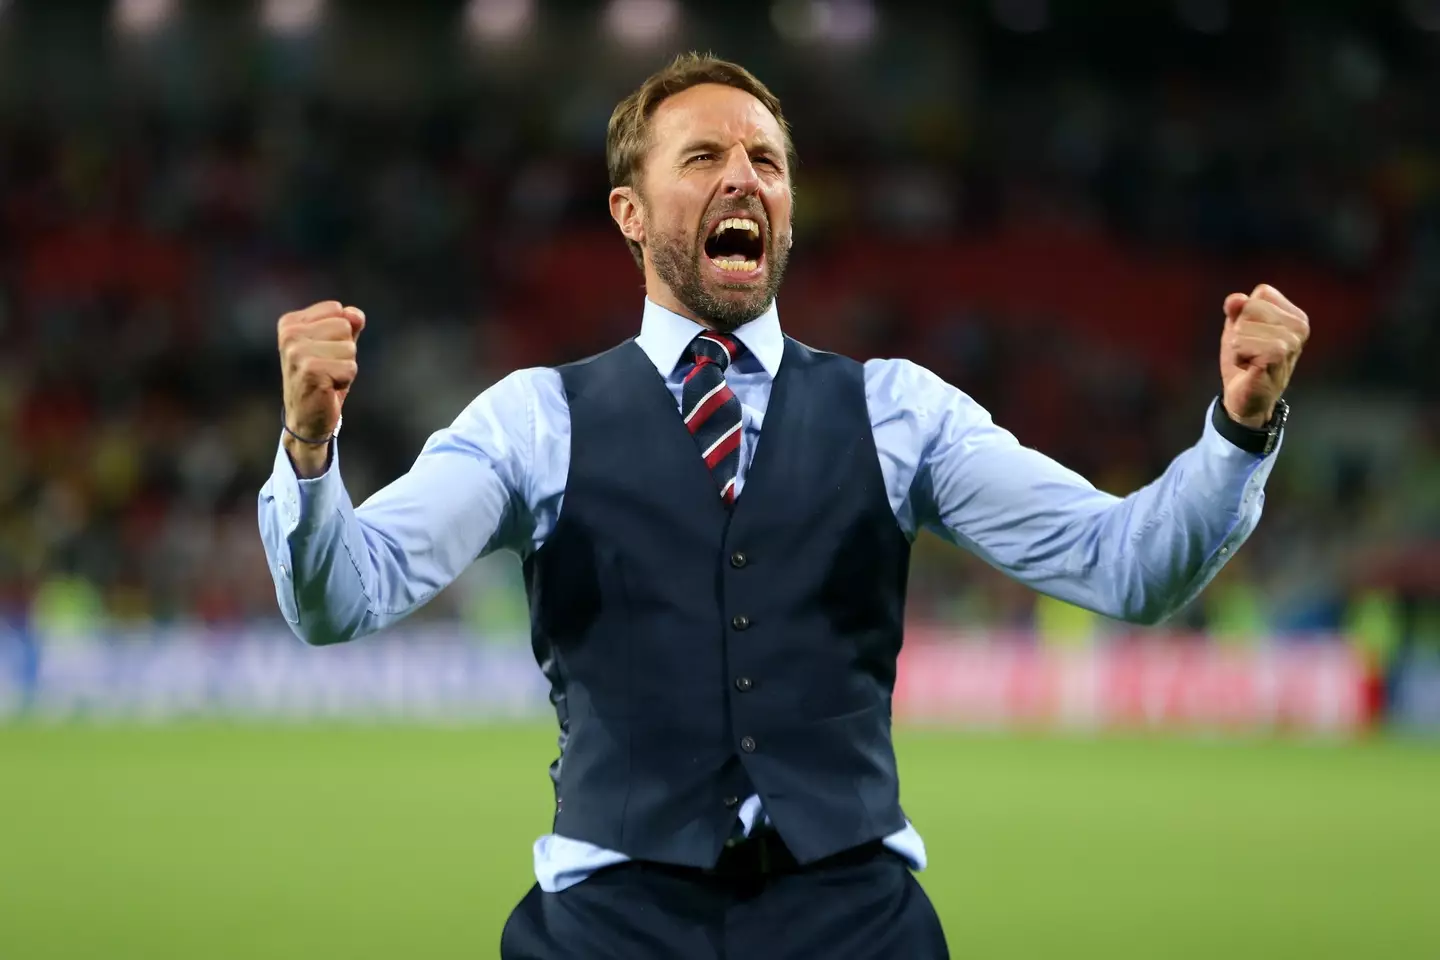 England manager Gareth Southgate led the Three Lions to the semi-finals of the 2018 World Cup.